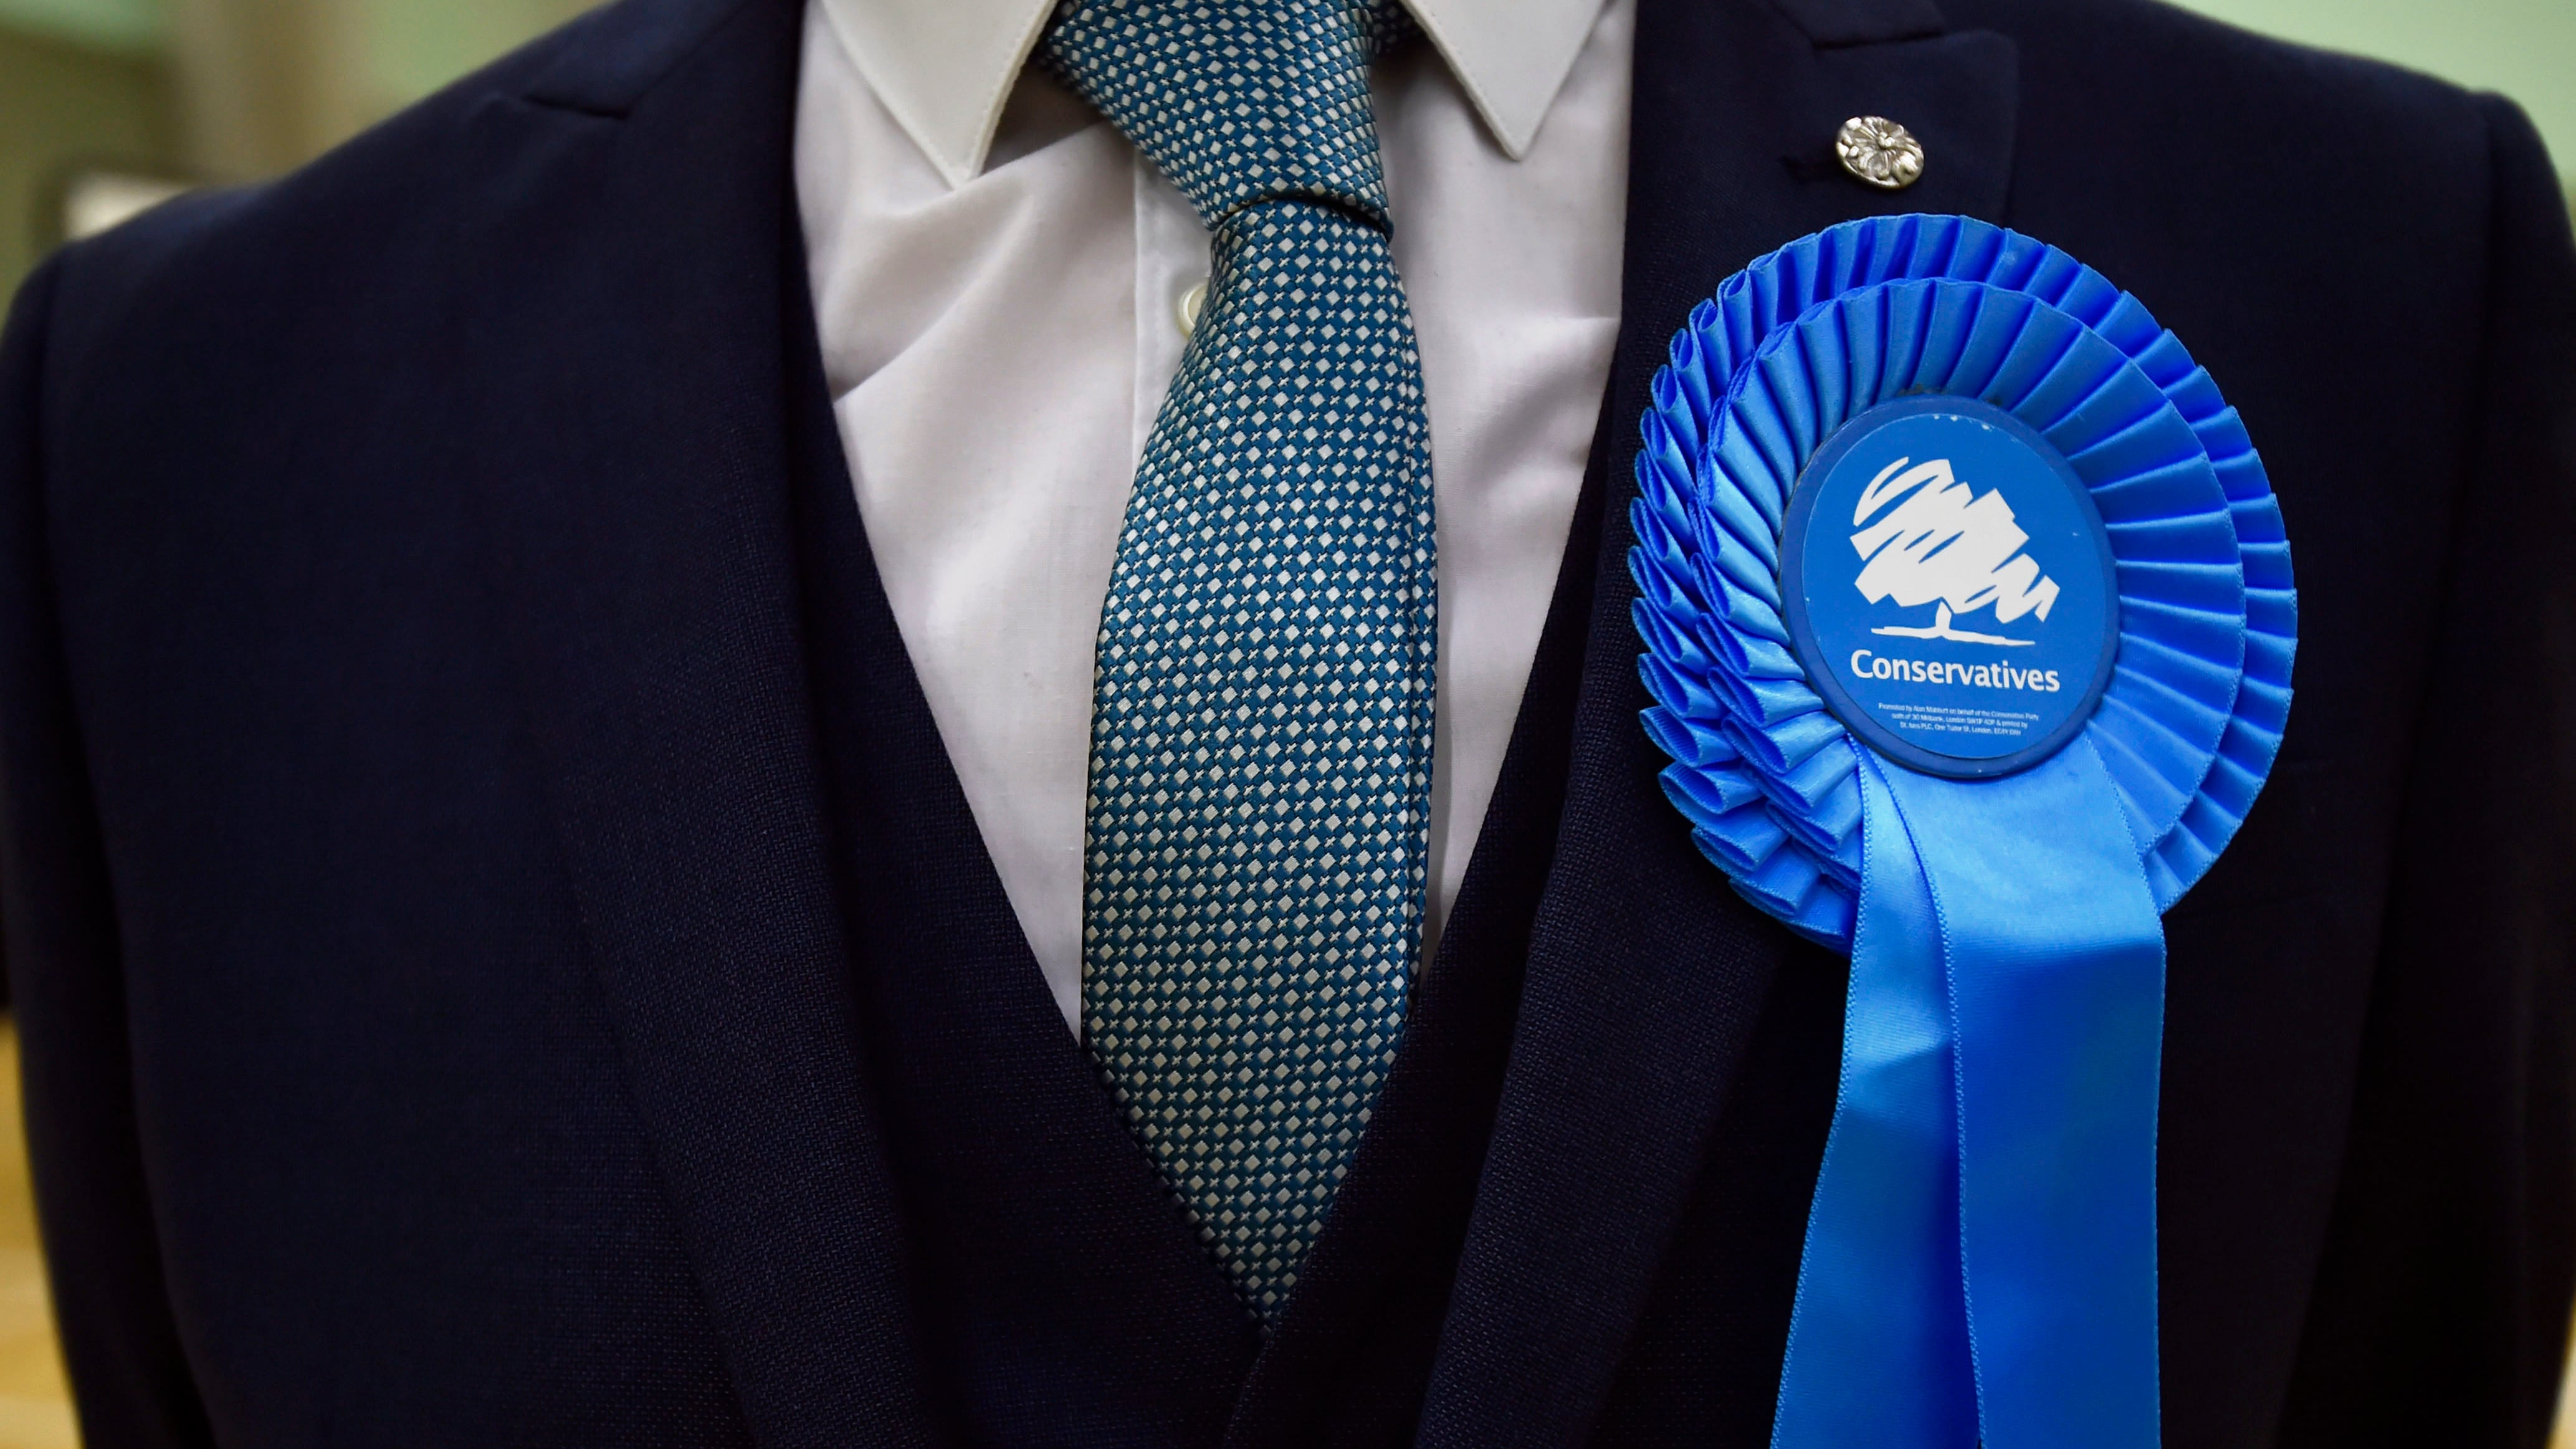 The Conservatives are setting out policies to attract voters in the north east